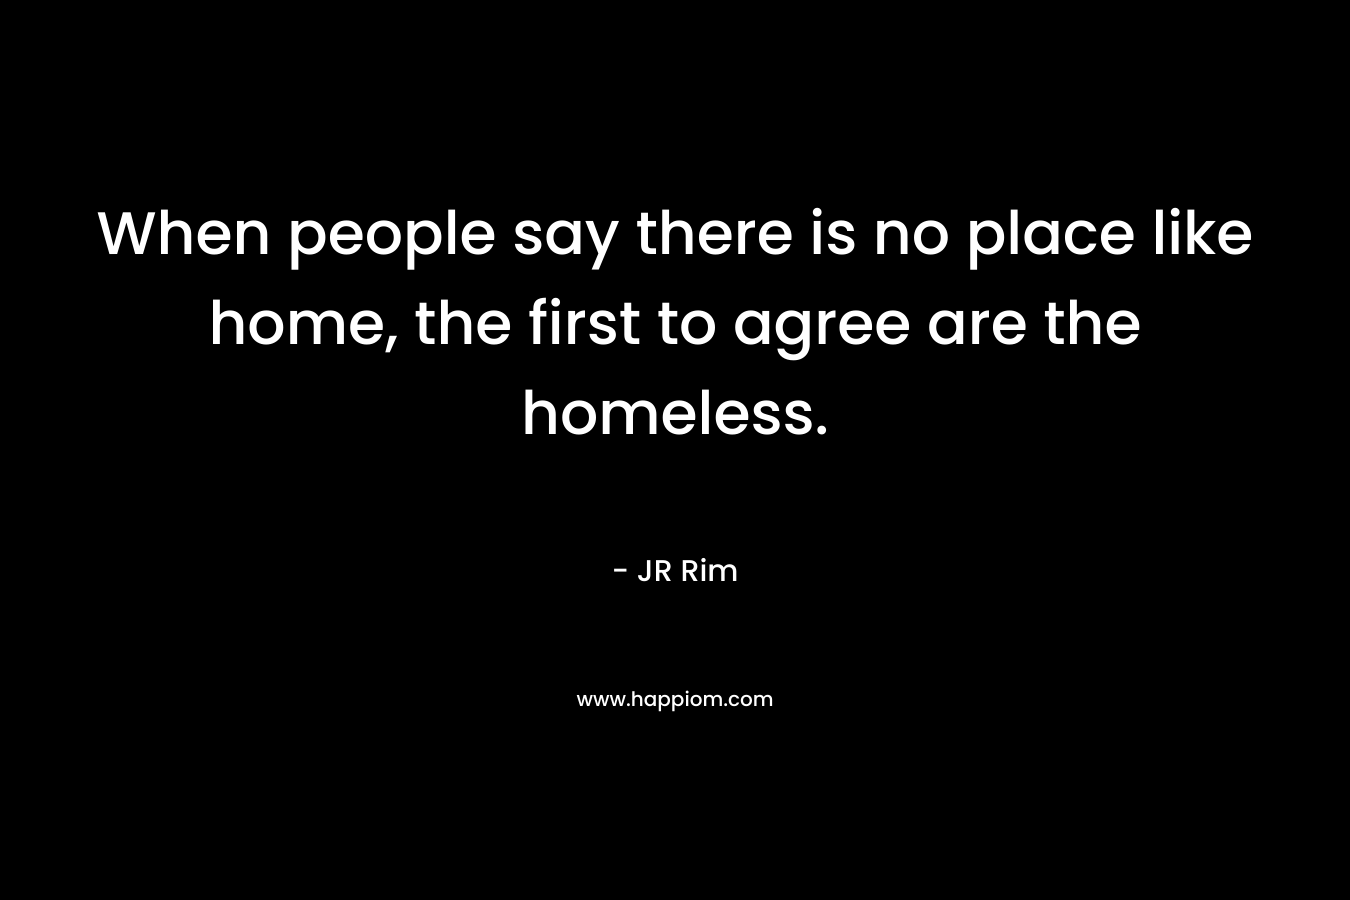 When people say there is no place like home, the first to agree are the homeless. – JR Rim